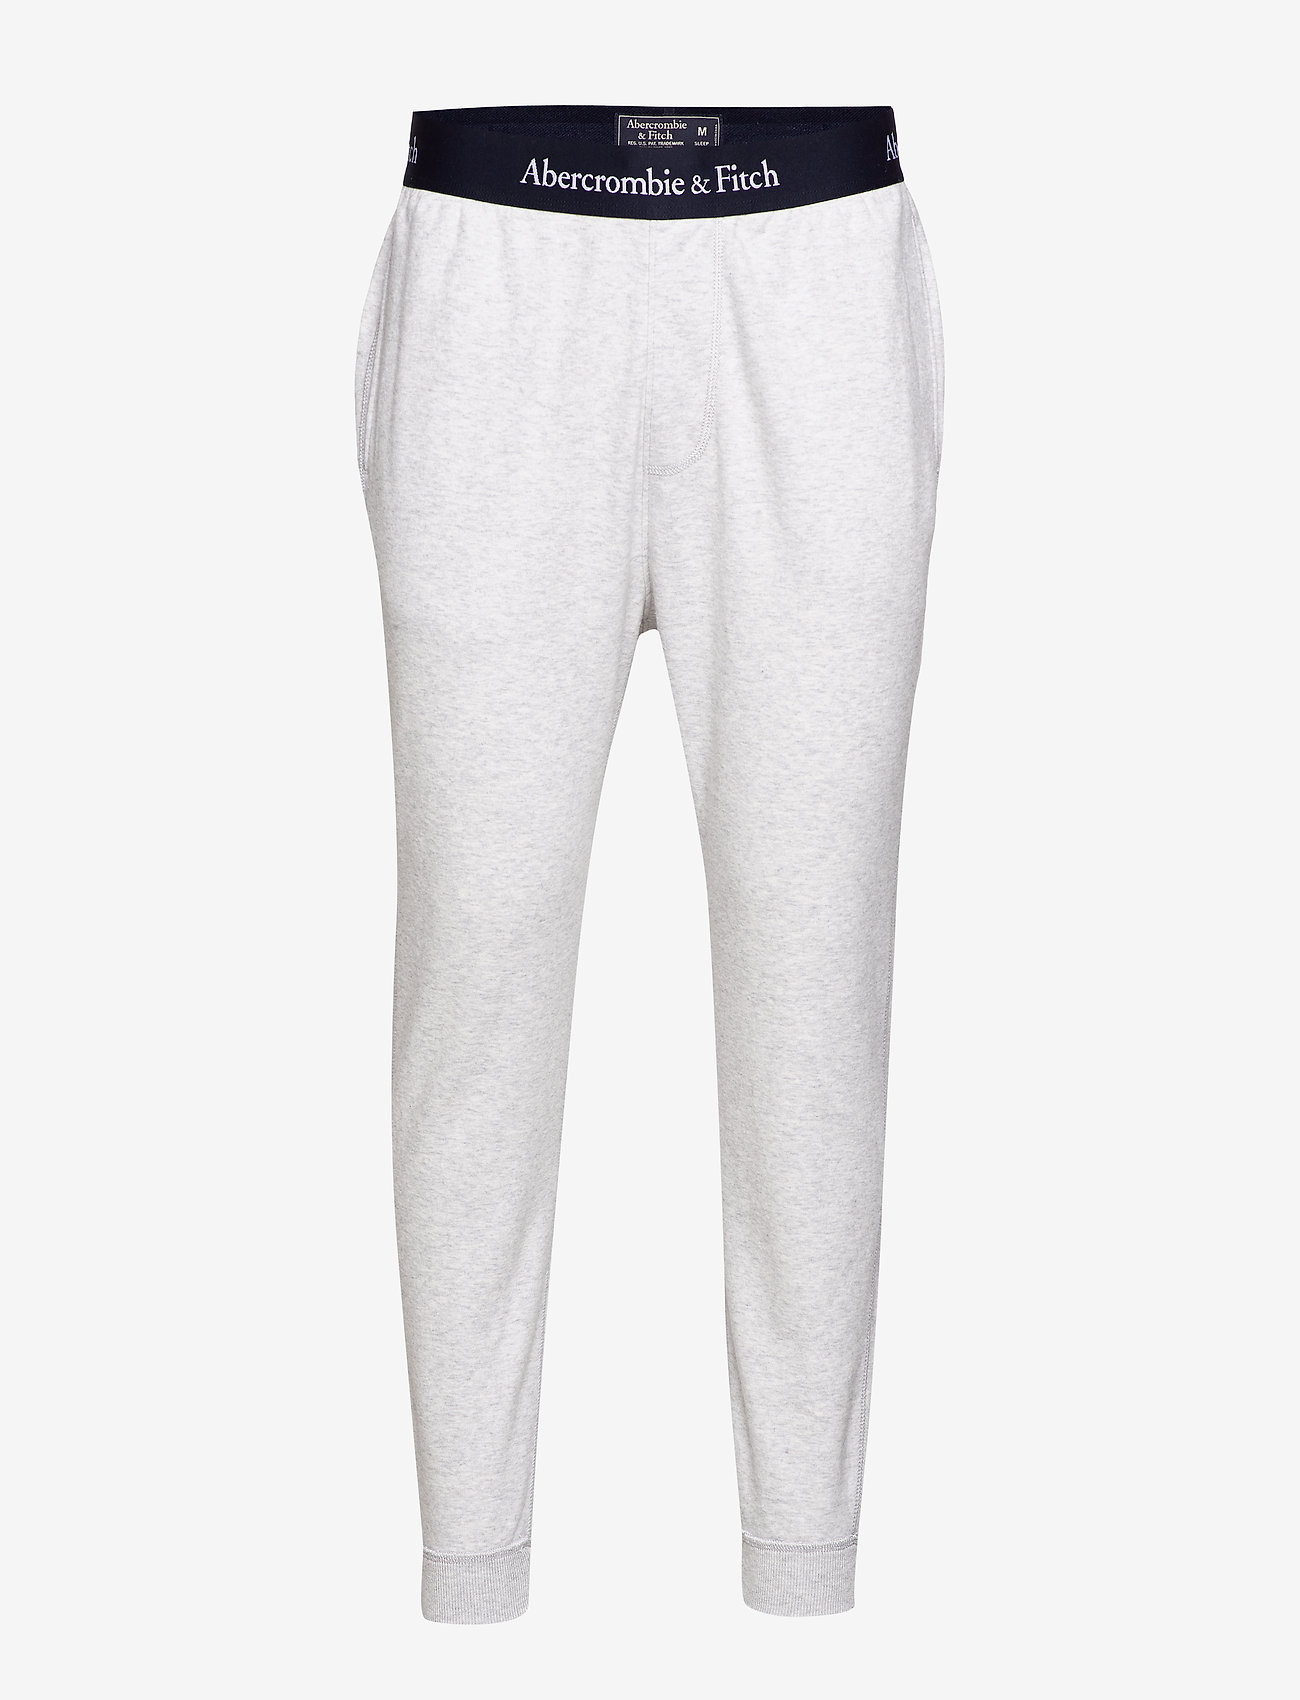 abercrombie & fitch jogger pants